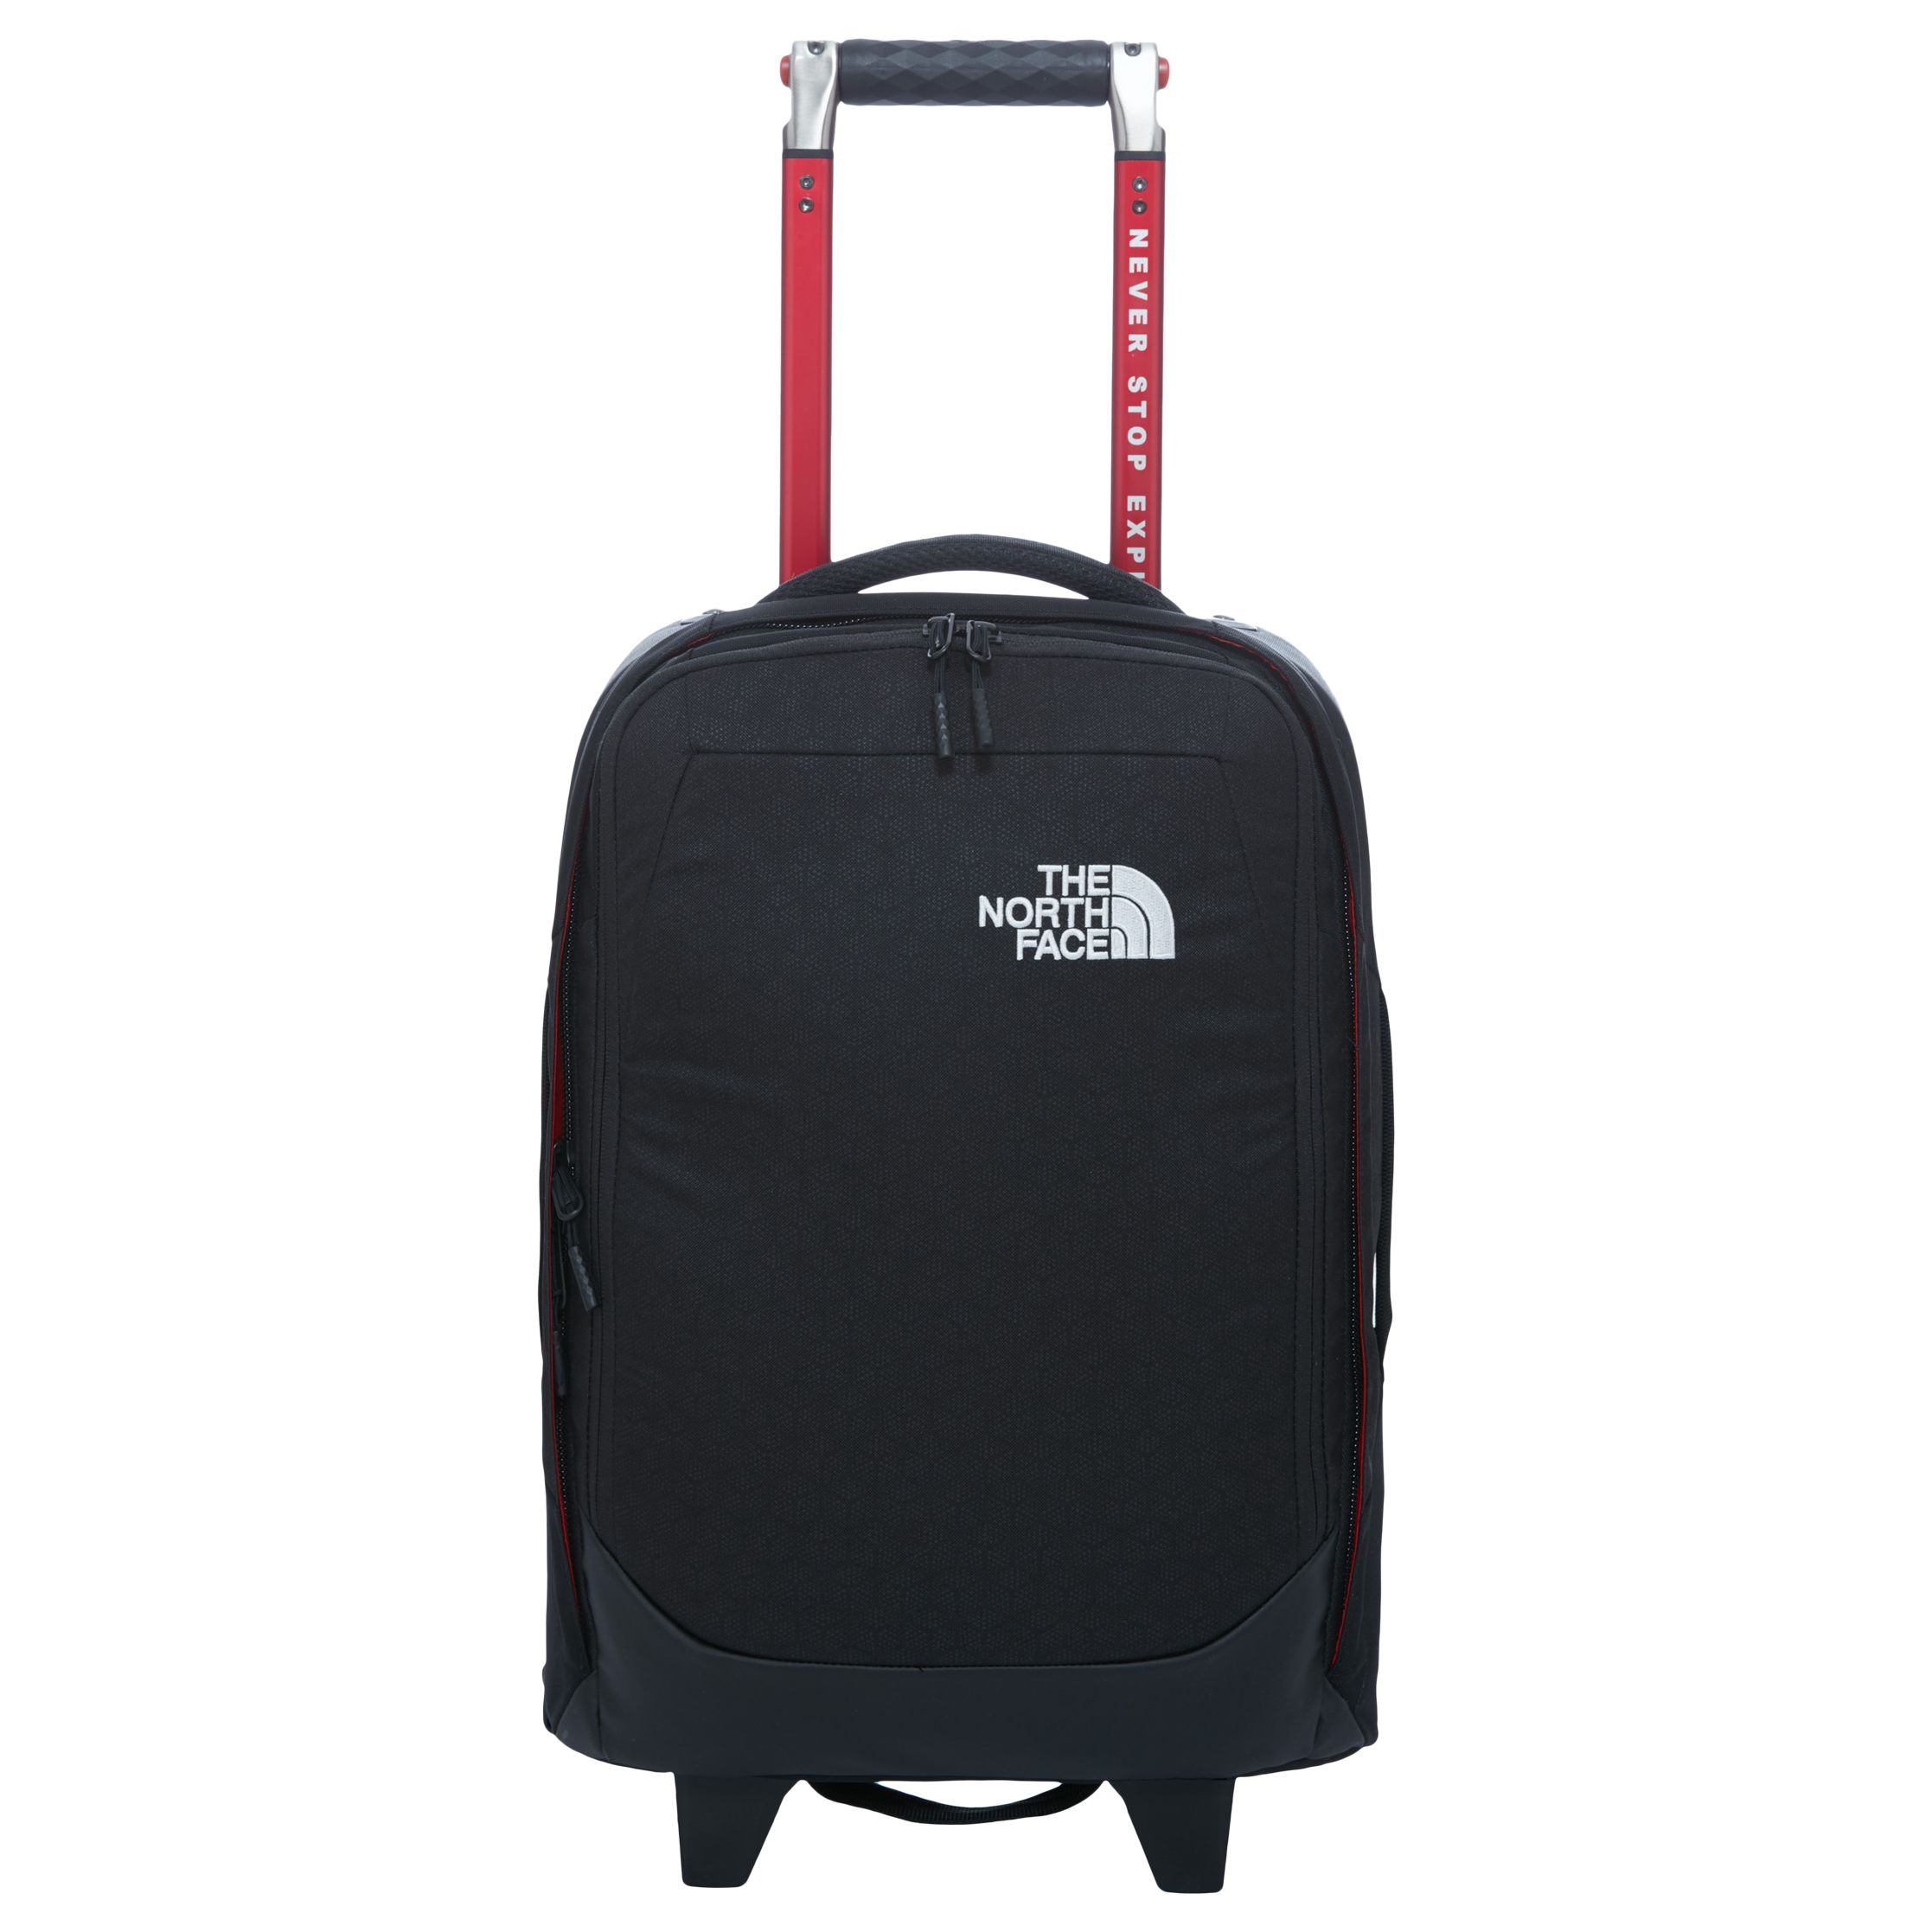 The North Face Overhead Cabin Bag, Black at John Lewis & Partners